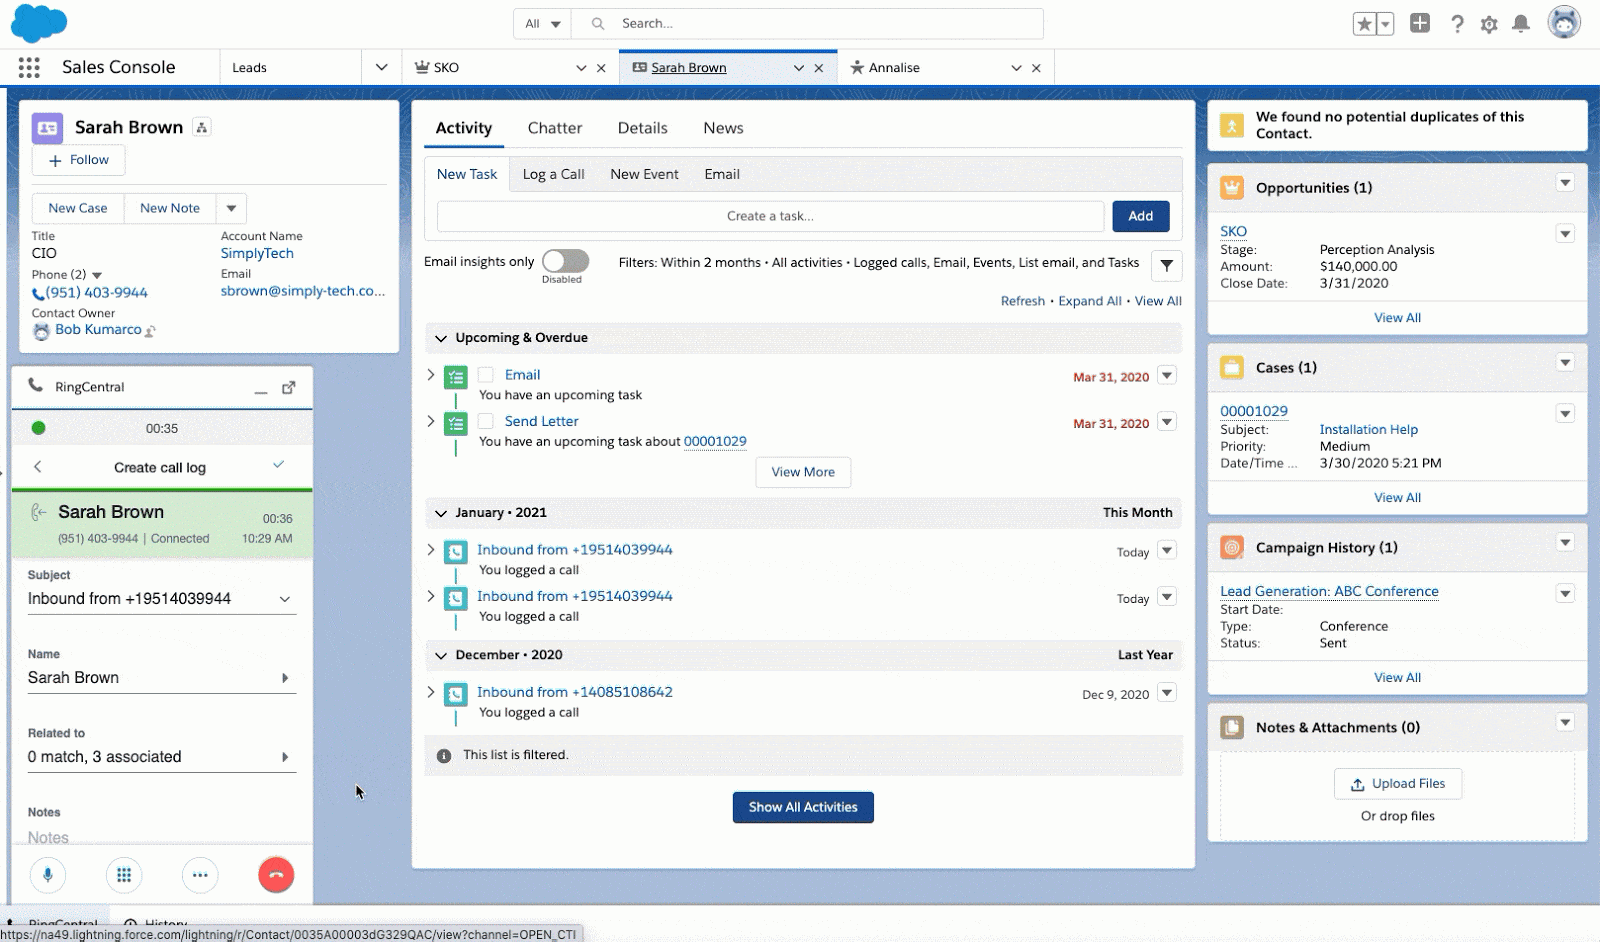 GIF showing RingCentral and Salesforce integration.